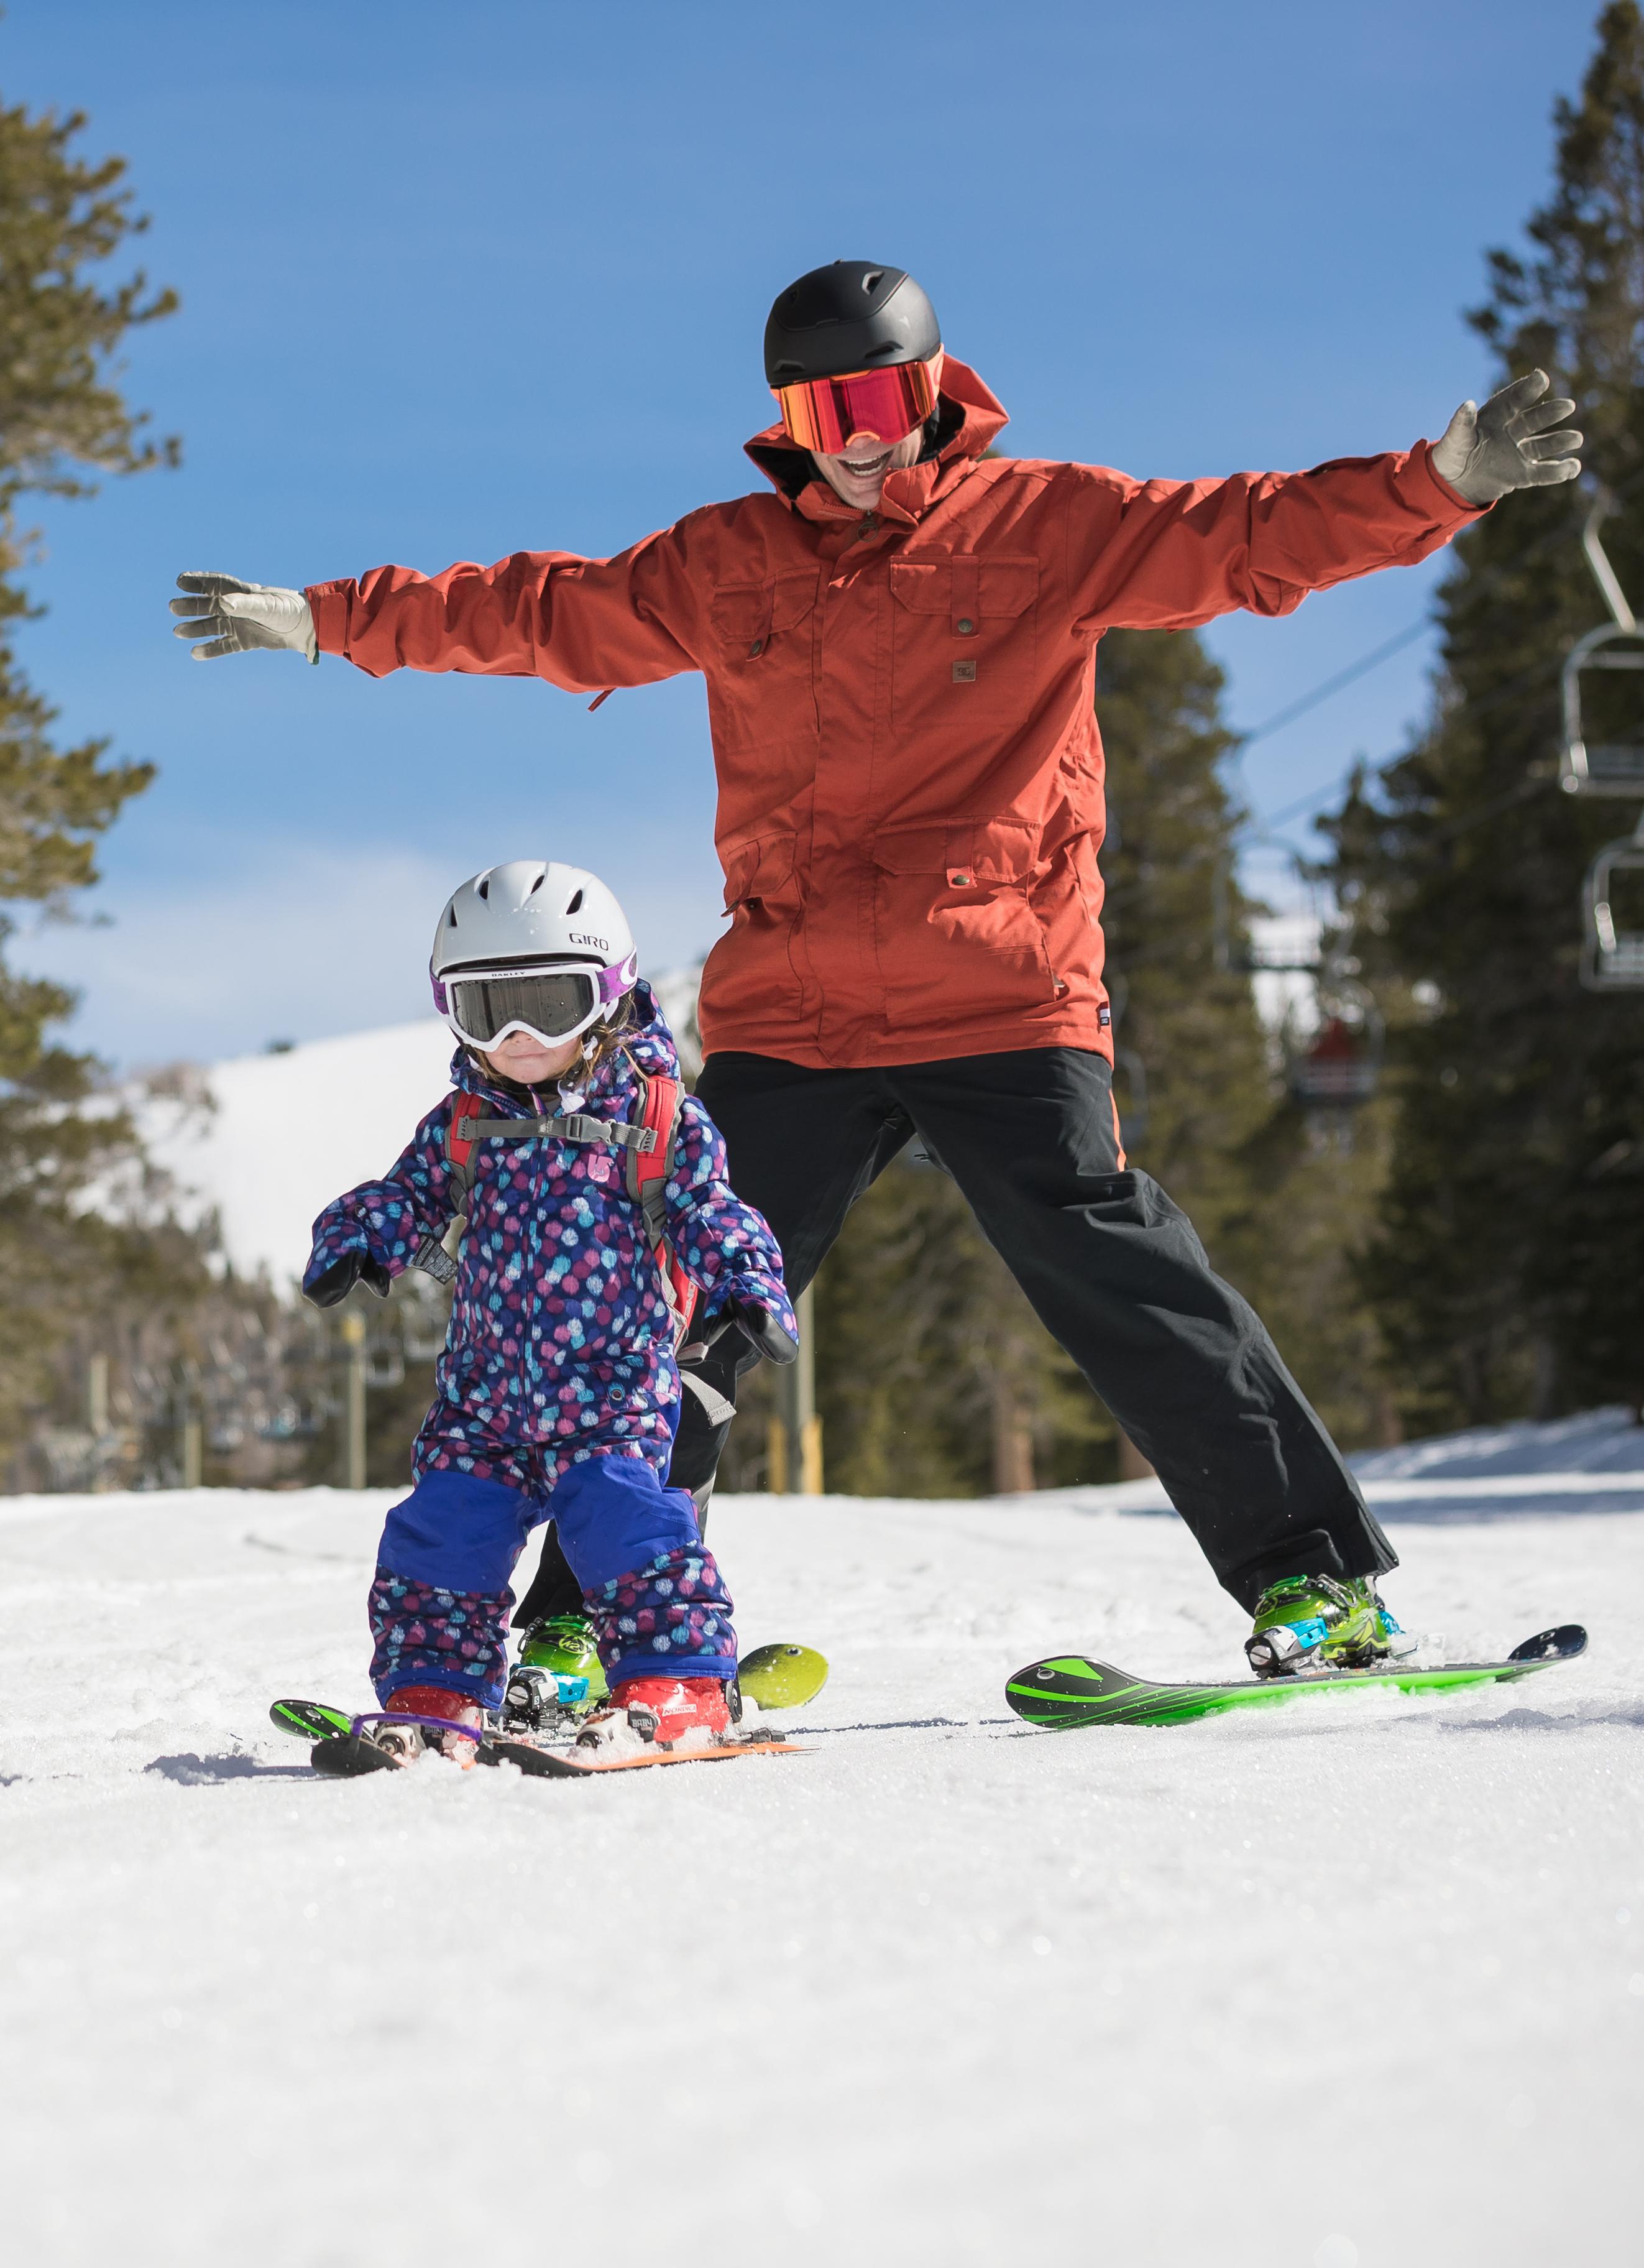 An adult skiing behind a child also on skis